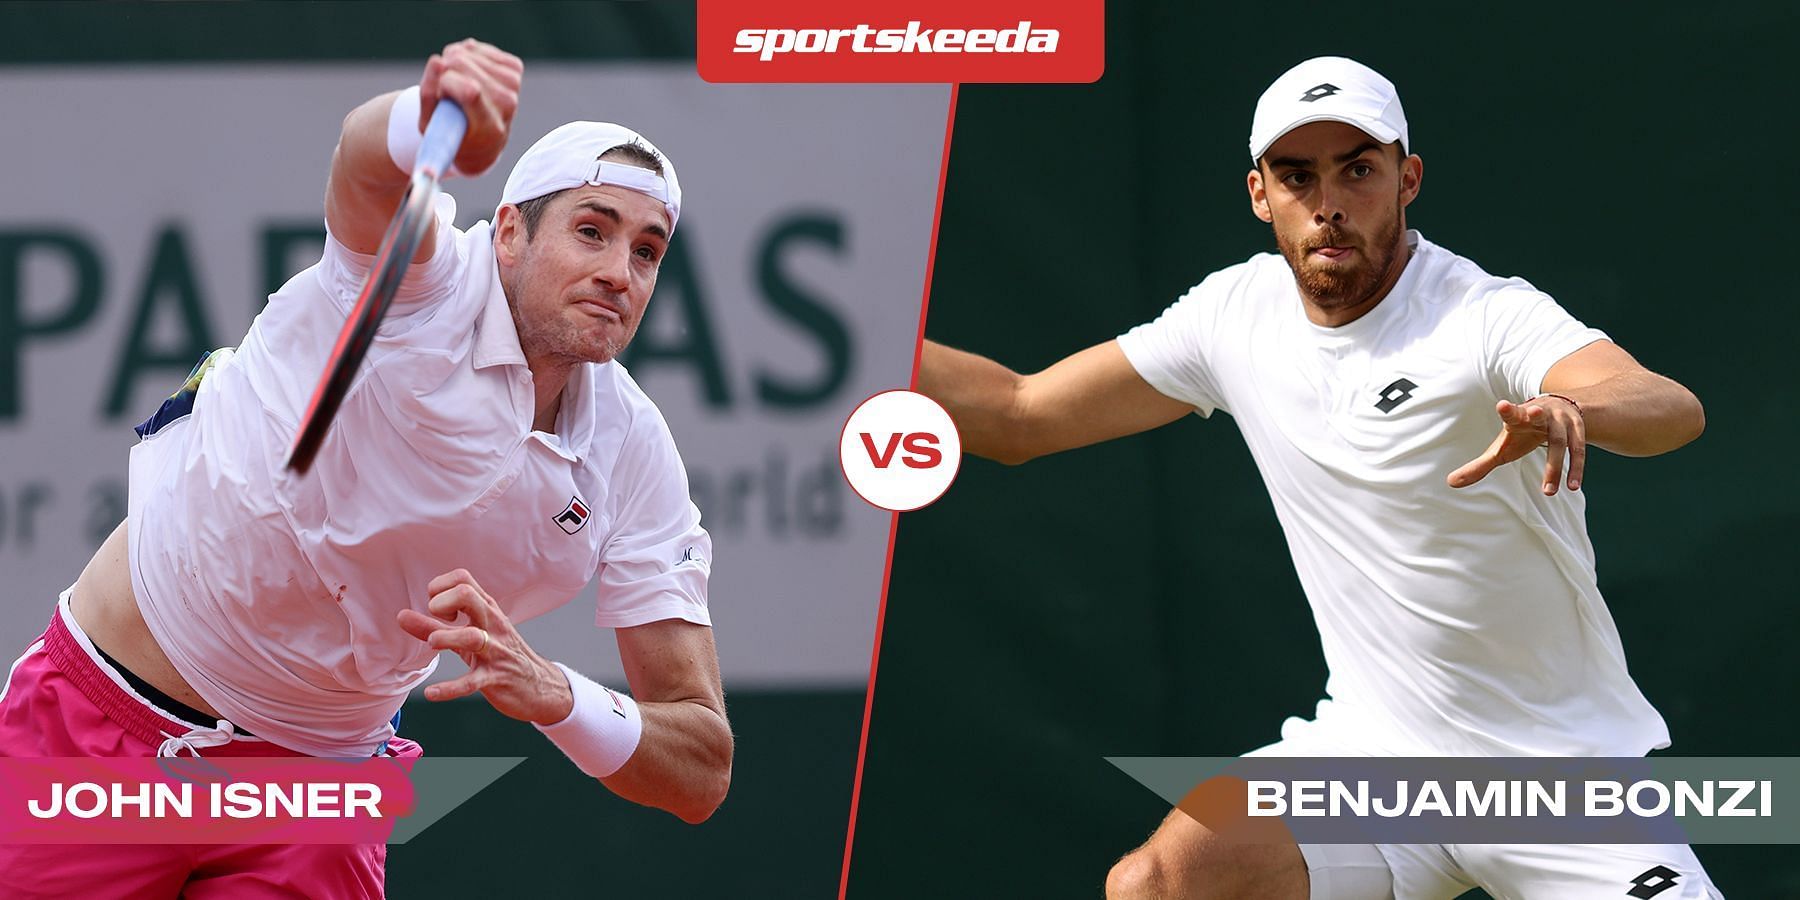 Isner takes on Bonzi in the quarterfinals of the Hall of Fame Open